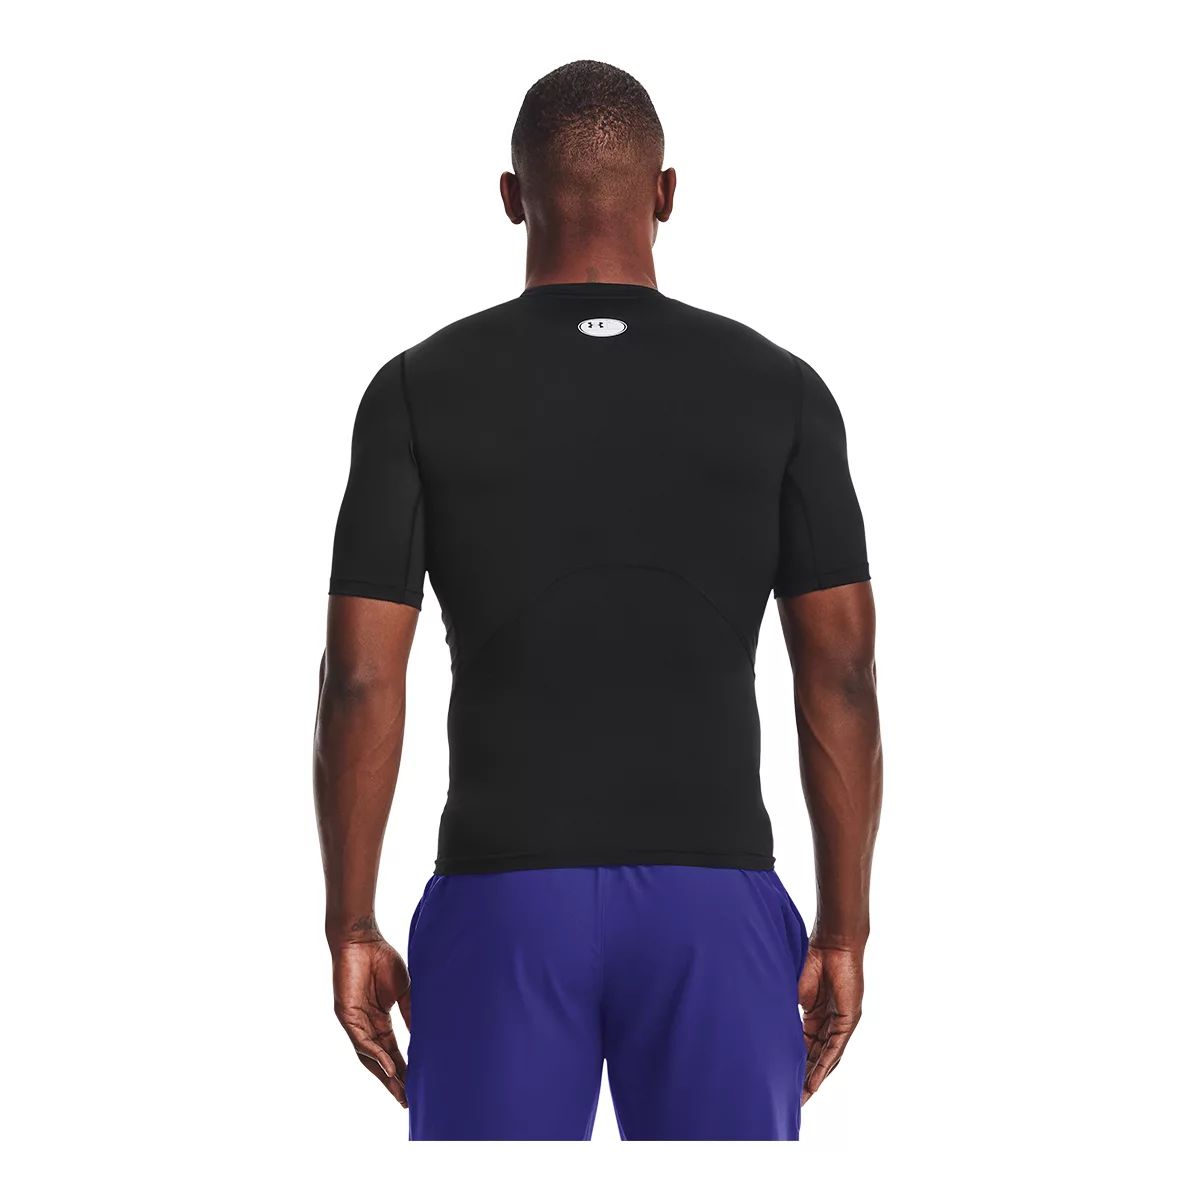 Under Armour Men's HeatGear CoolSwitch Compression Short Sleeve Shirt -  Black